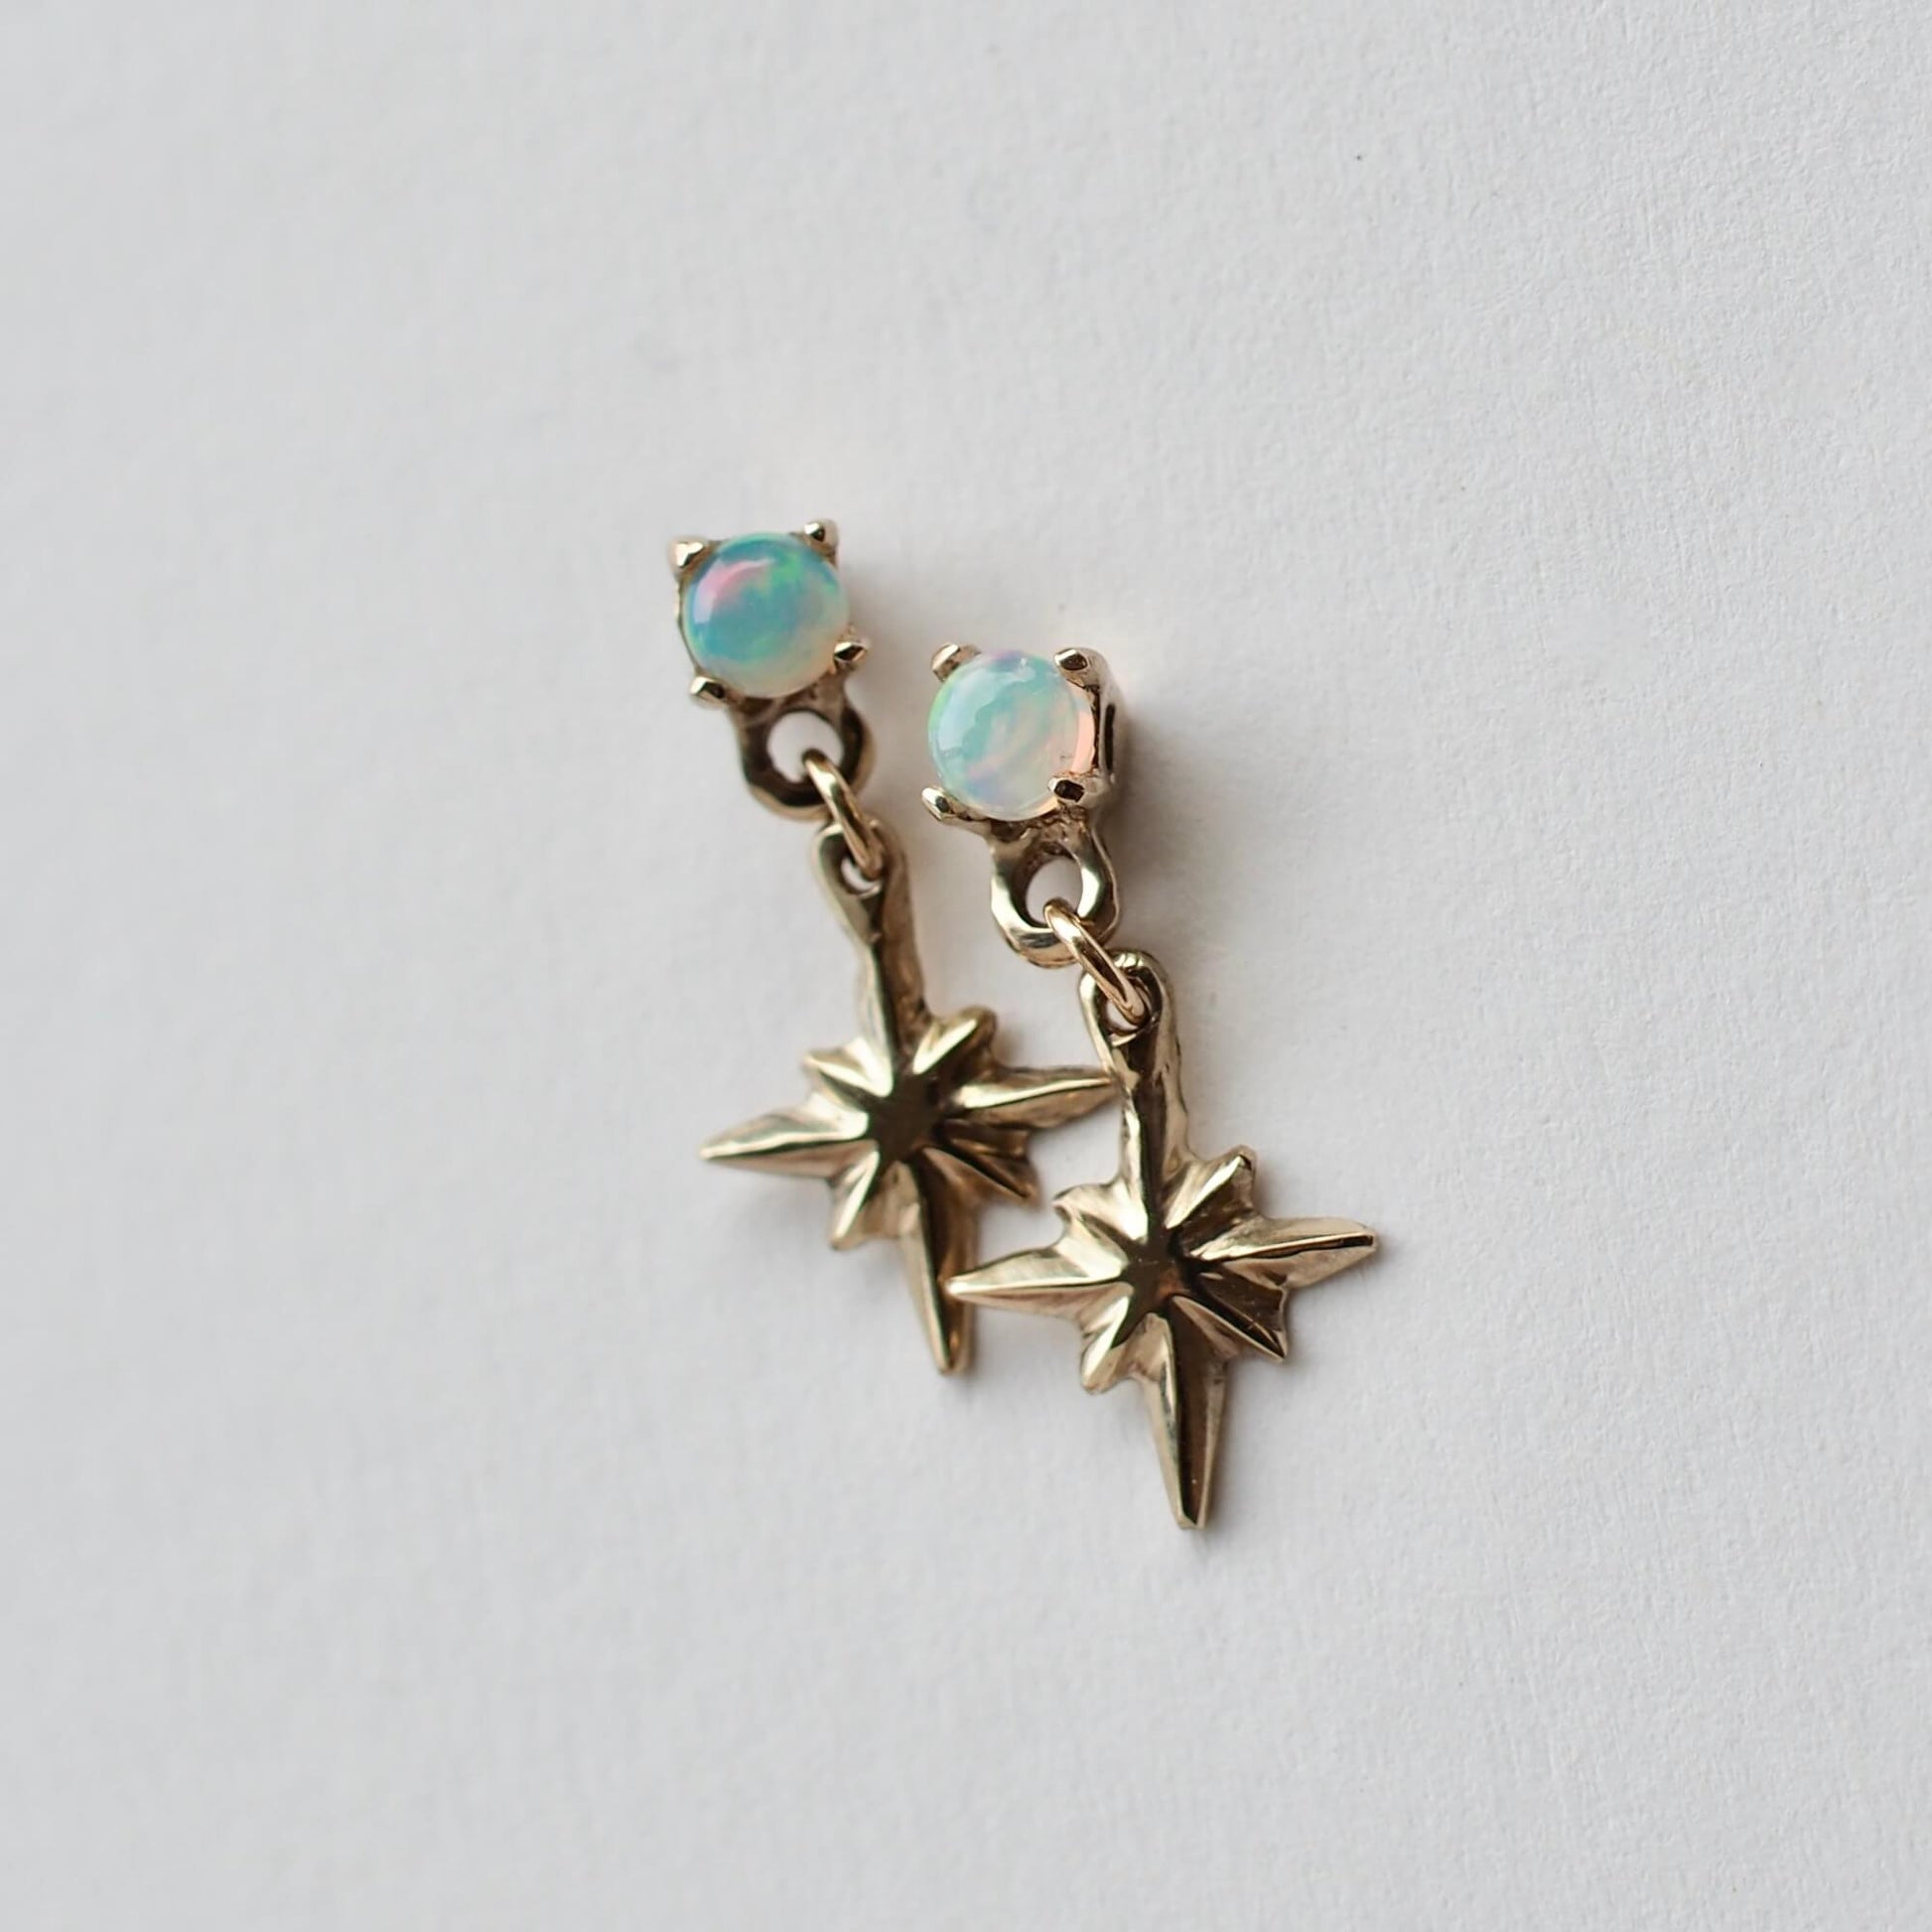 Tiny star dangle earrings in gold tone bronze, set with opals